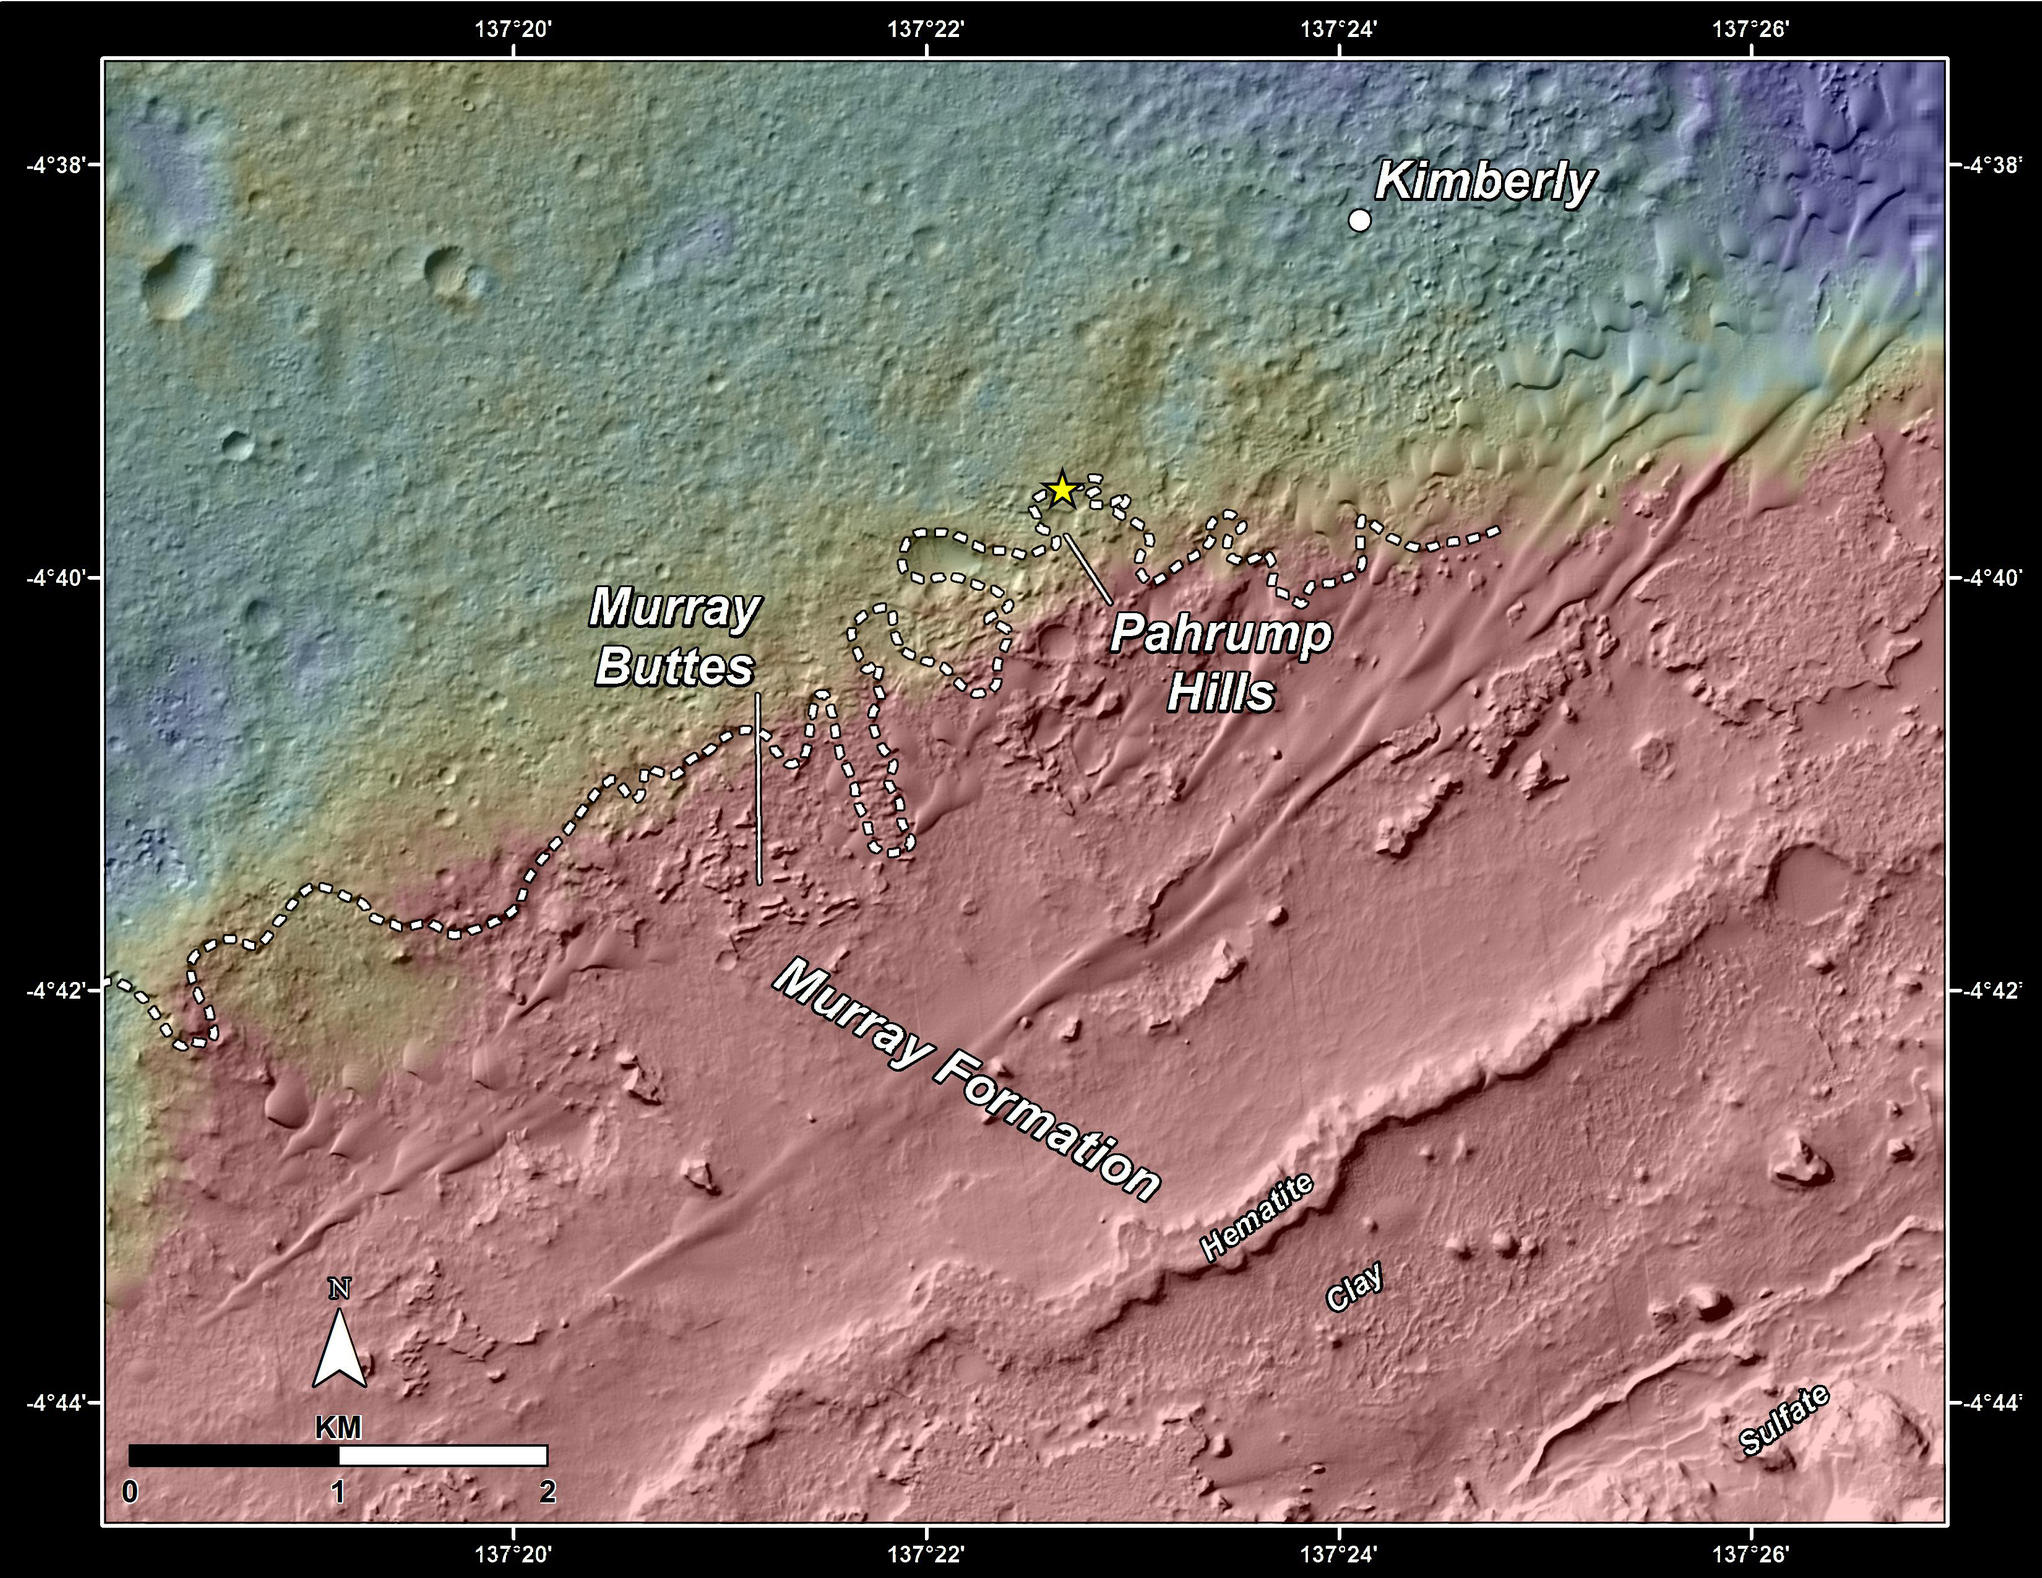 This topography map shows a portion of the Gale Crater region on Mars, where NASA's Mars Curiosity rover landed on August 6, 2012.